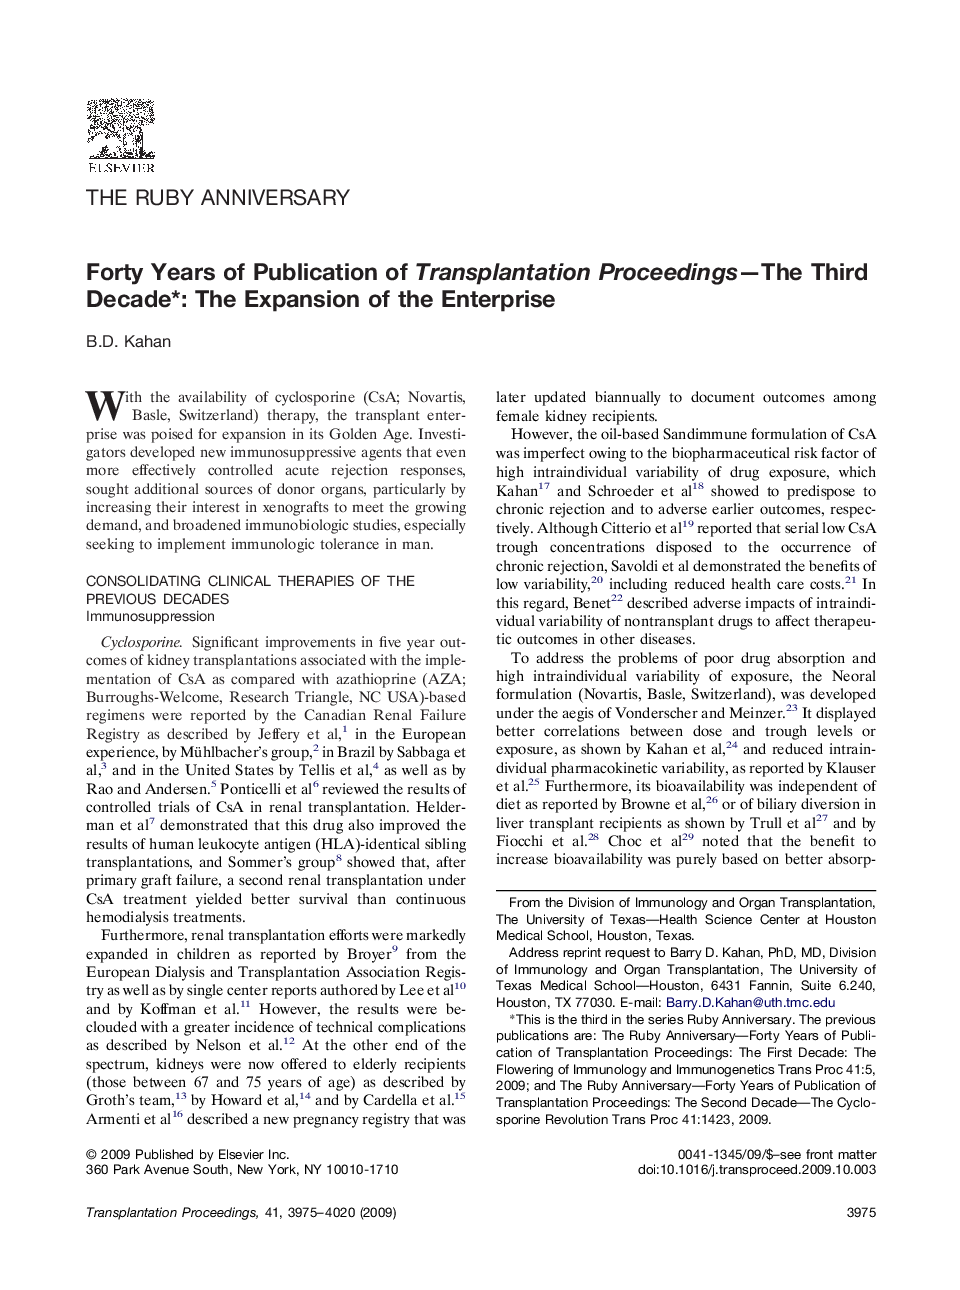 Forty Years of Publication of Transplantation Proceedings-The Third Decadeâ: The Expansion of the Enterprise